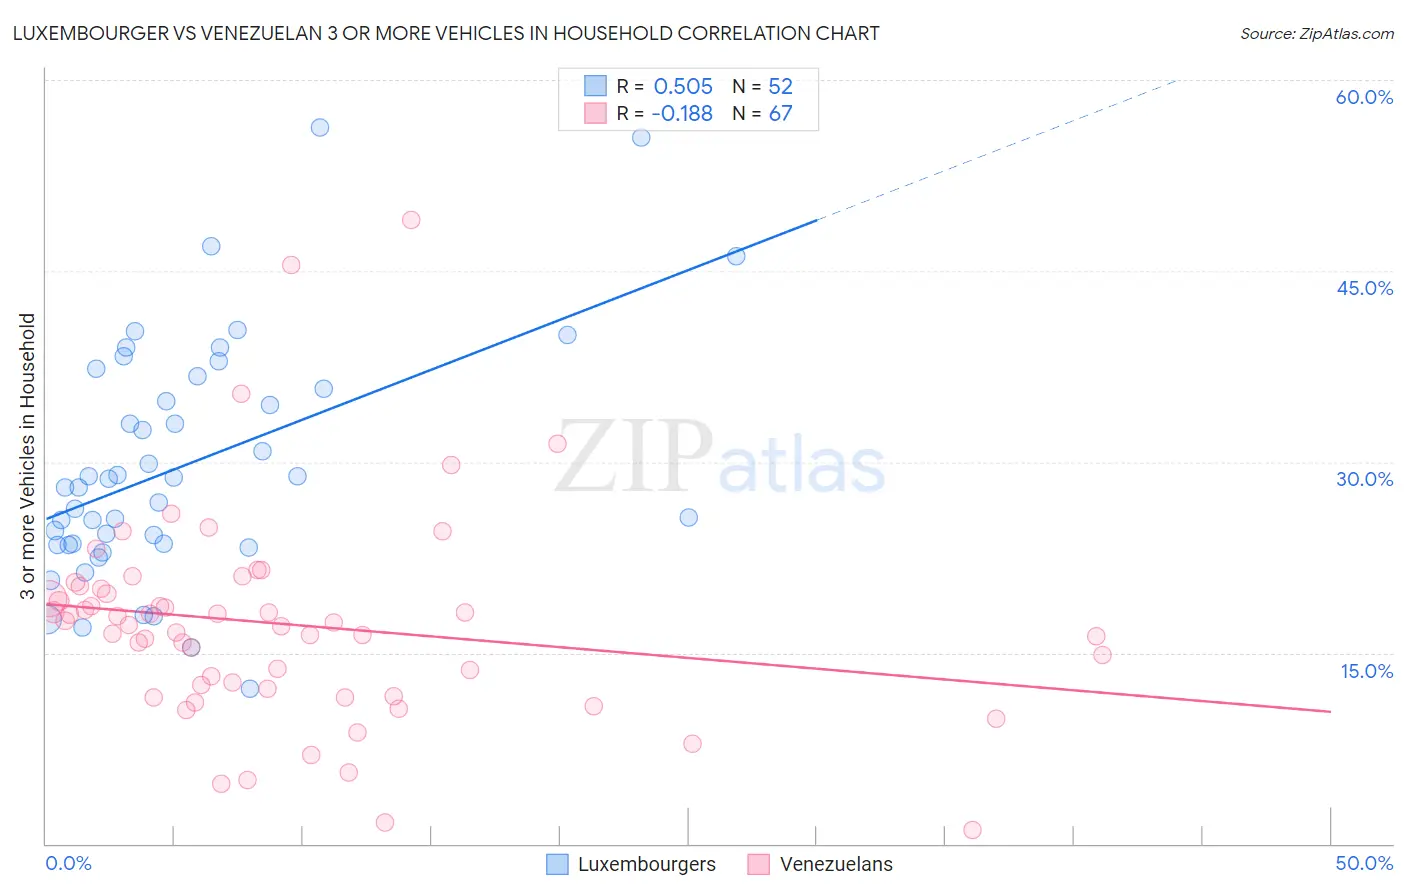 Luxembourger vs Venezuelan 3 or more Vehicles in Household